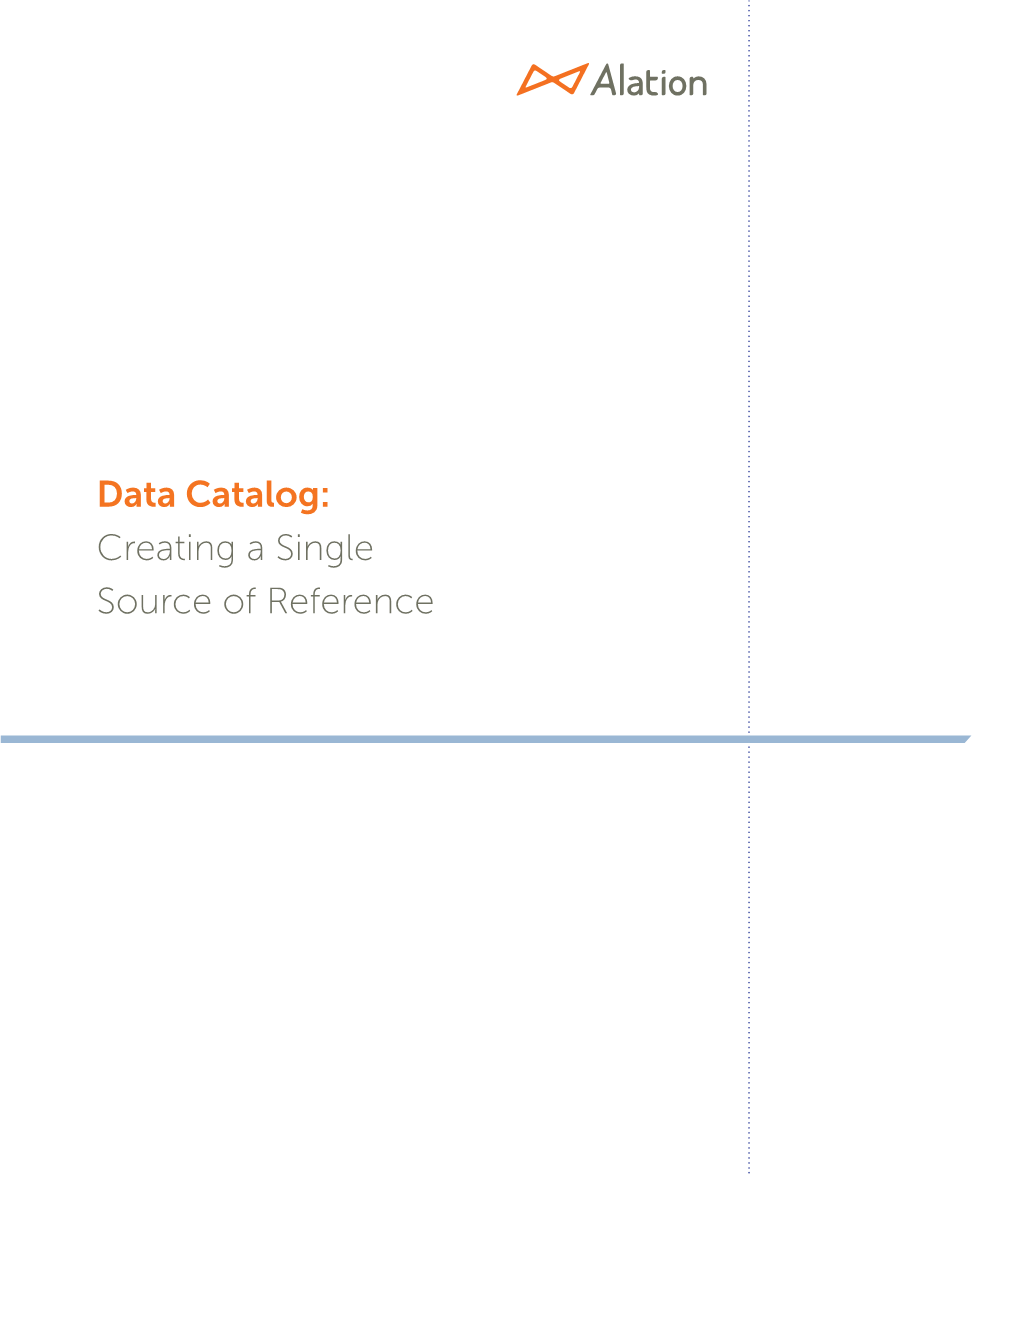 Data Catalog: Creating a Single Source of Reference Data Catalog: Creating a Single Source of Reference